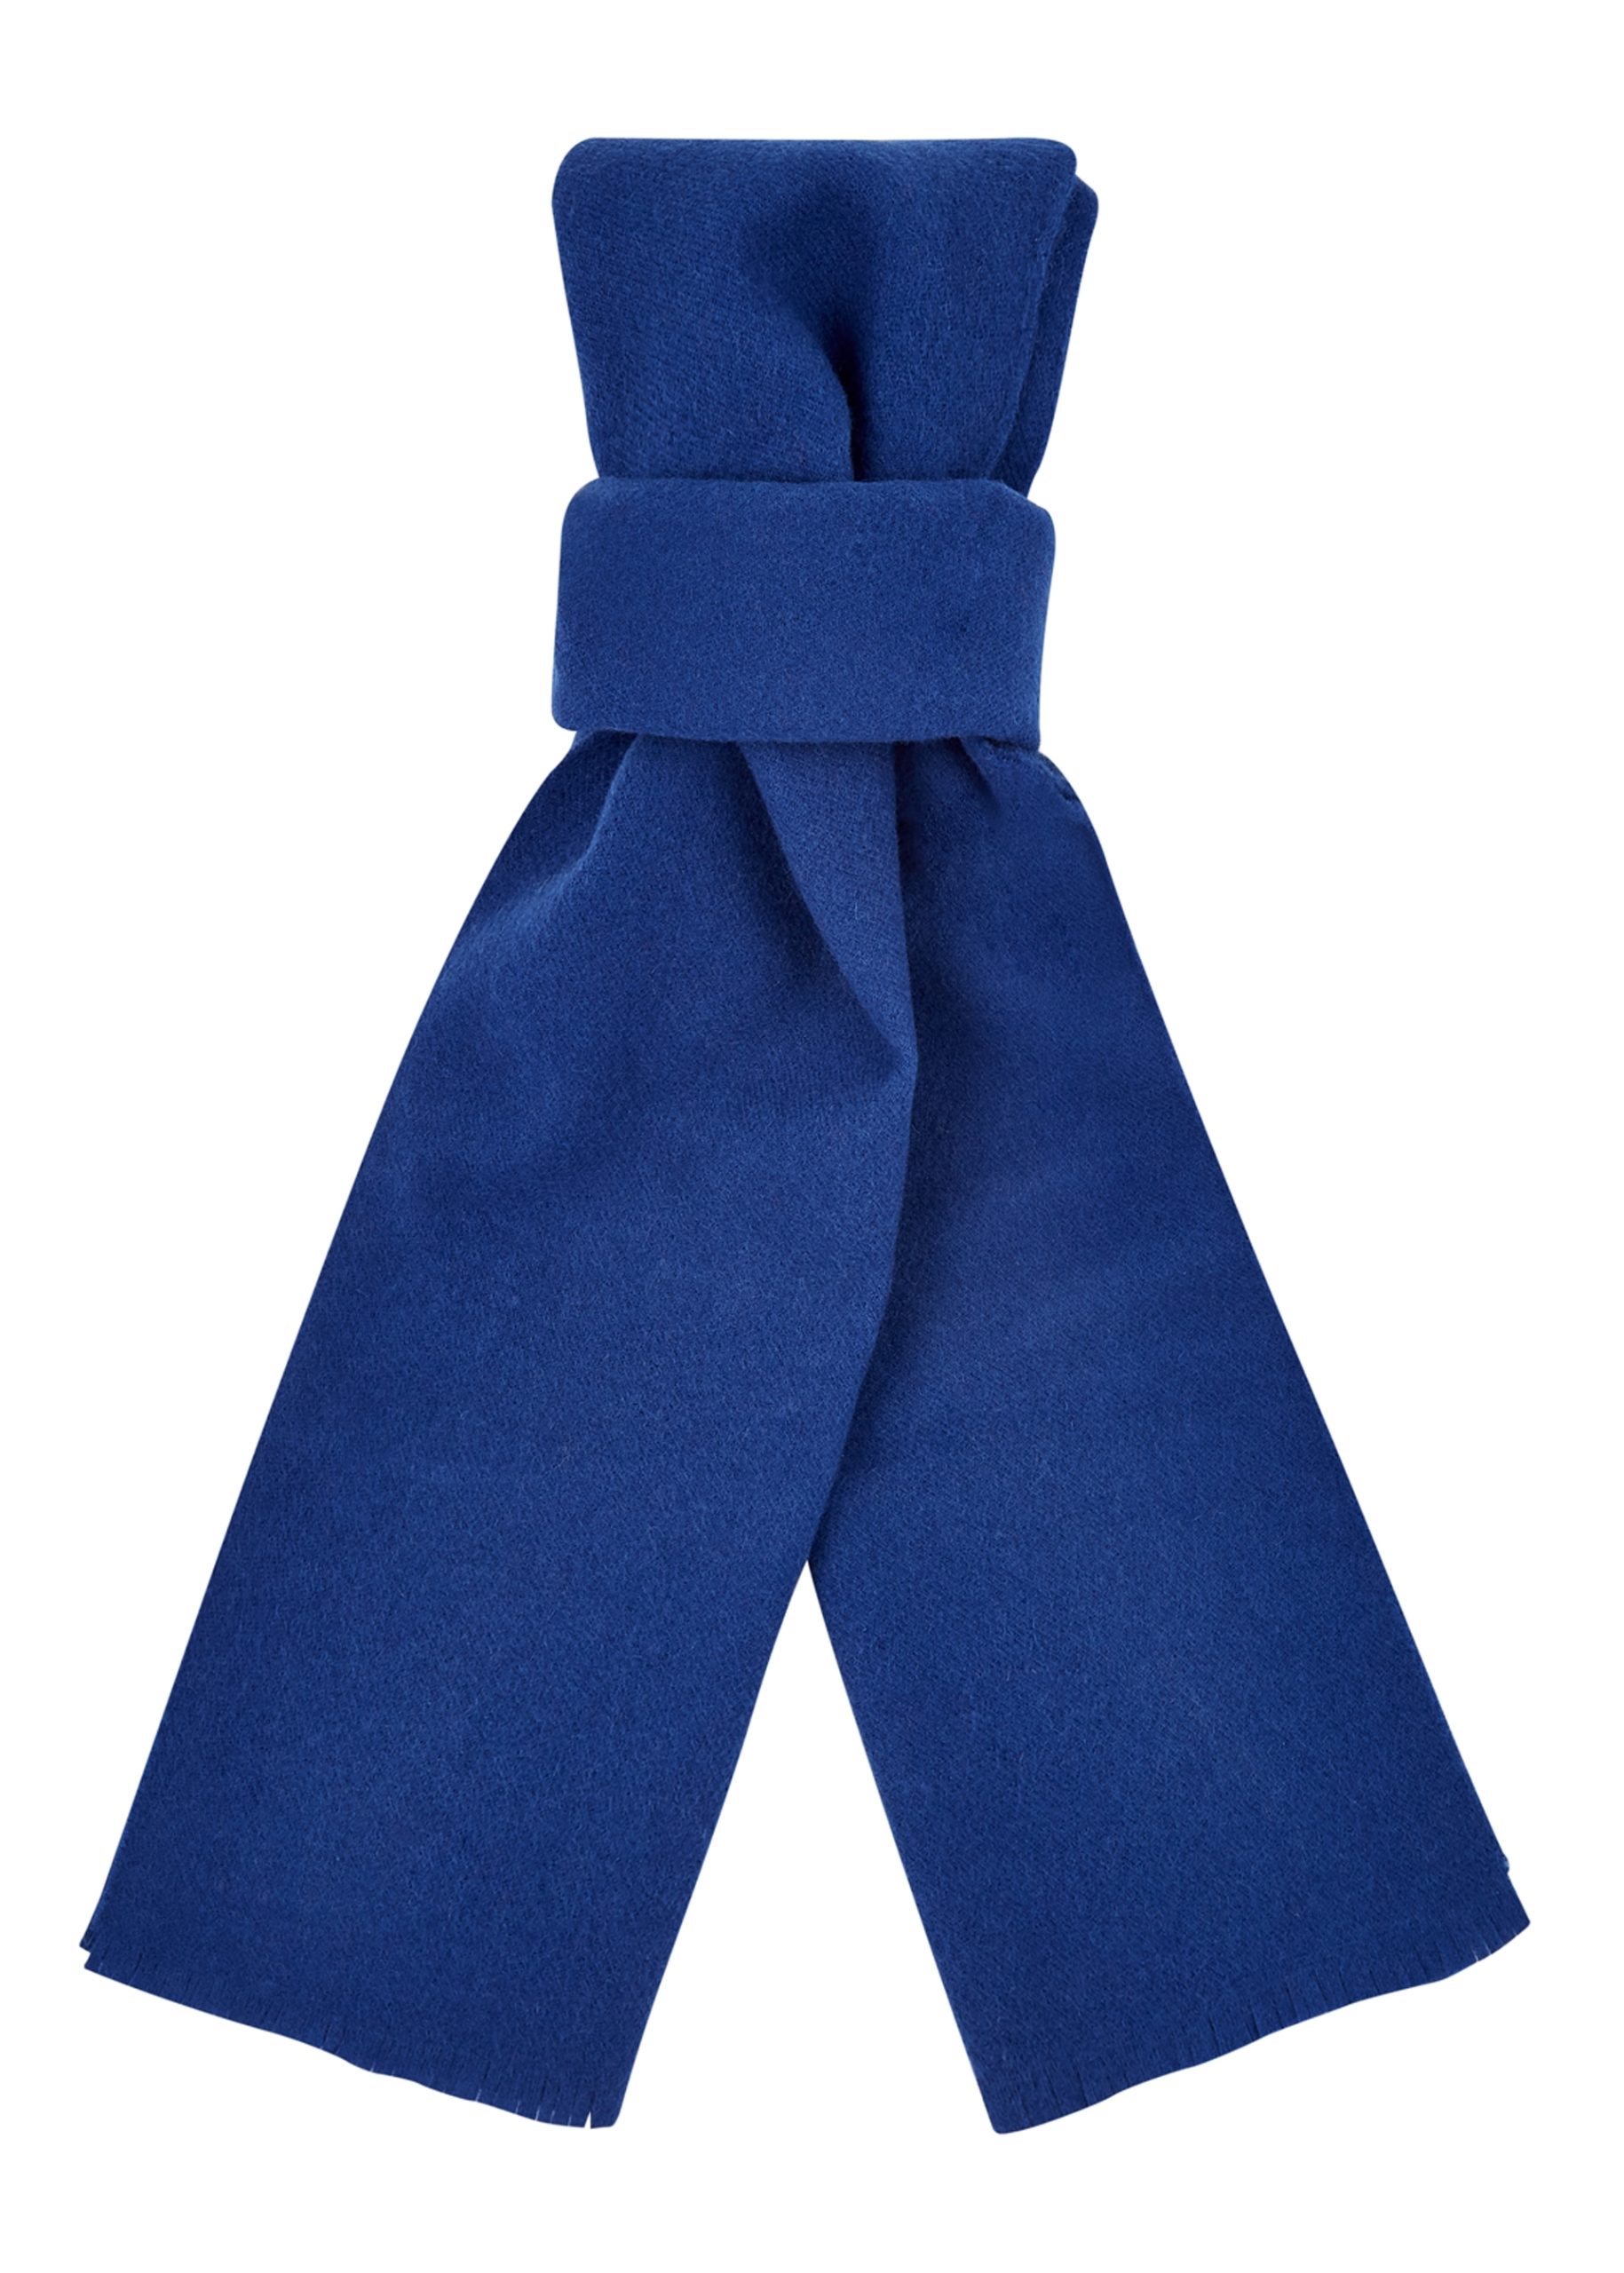 Roderick Charles men’s lambswool scarf in royal blue